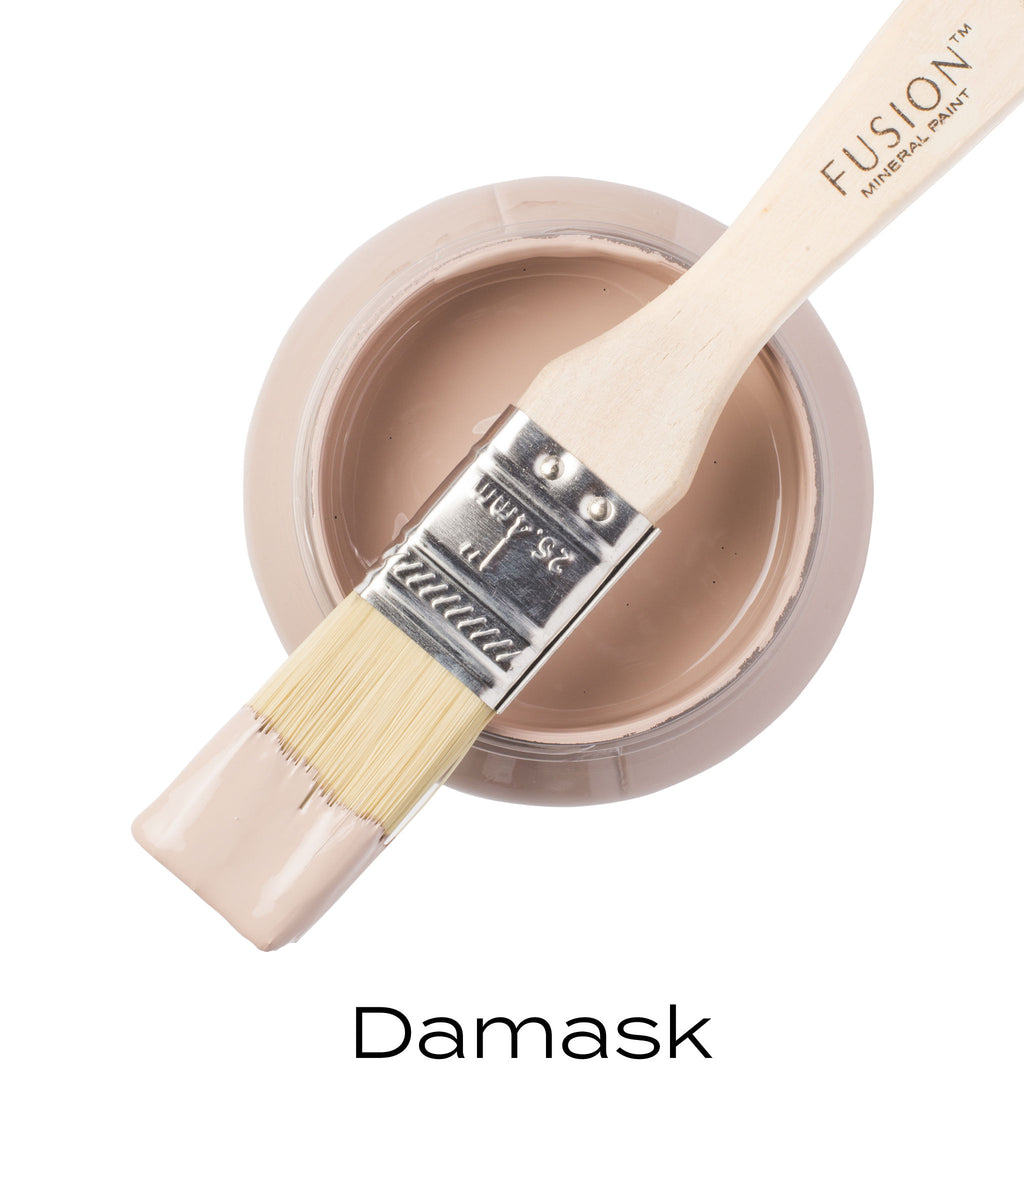 Damask Fusion Mineral Paint Near Me